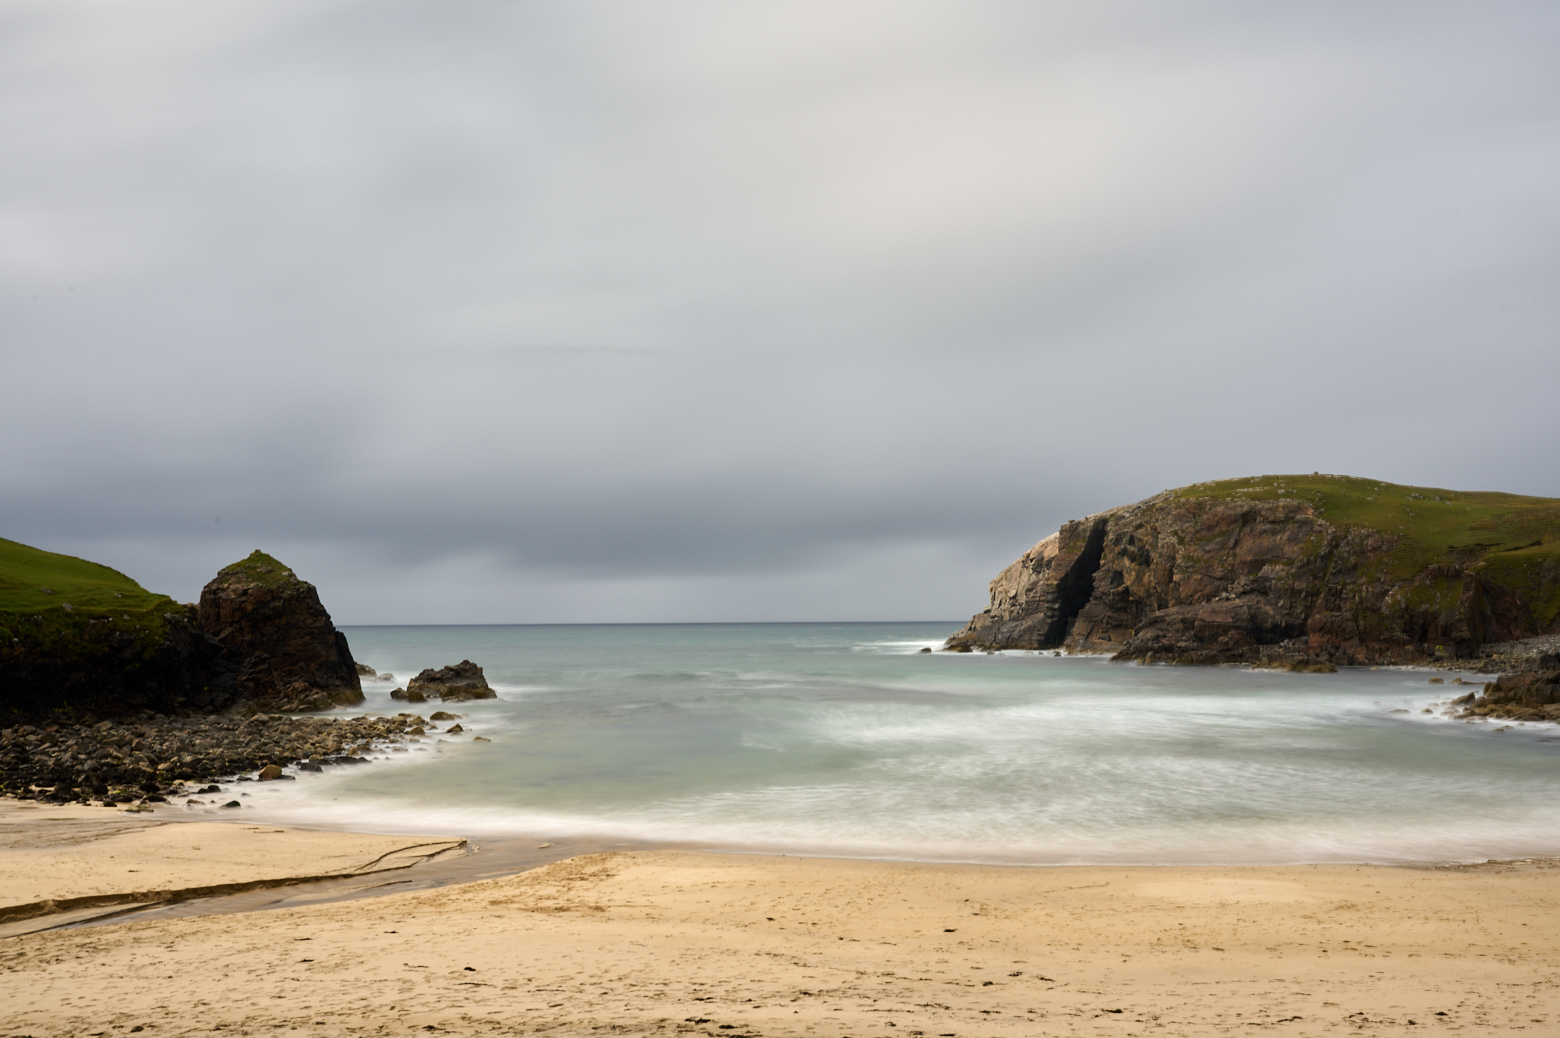 A walk along Dalmore beach in the Isle of Lewis, Outer Hebrides.